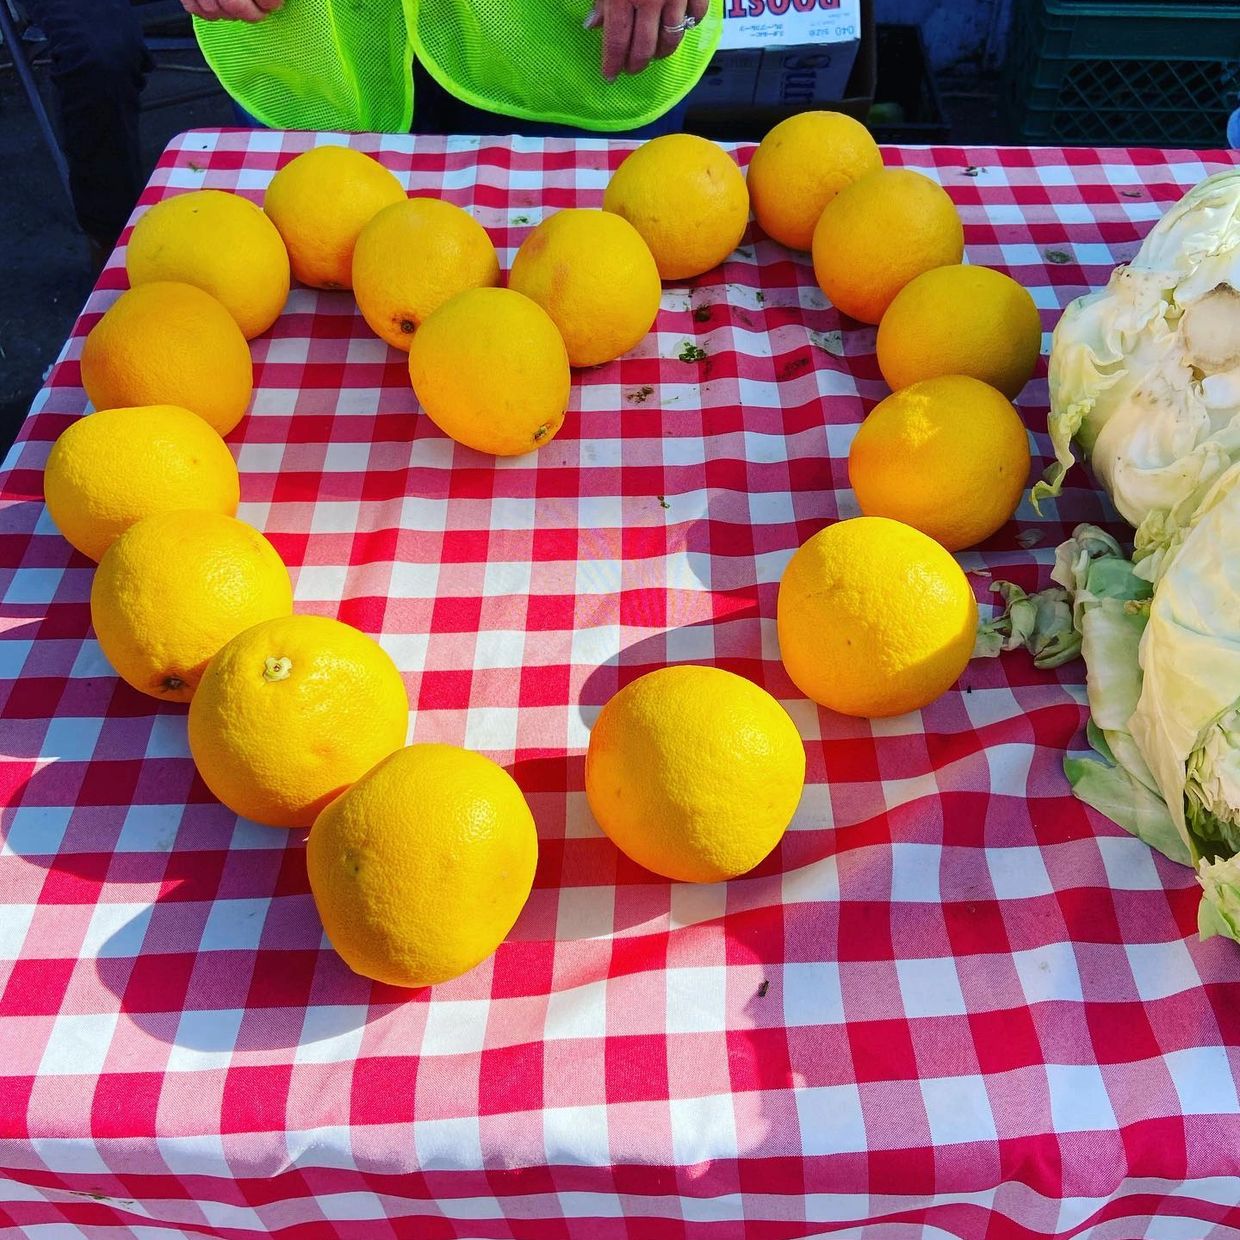 a bunch of grapefruits displayed in a heart shape on a red and white checkered tablecloth